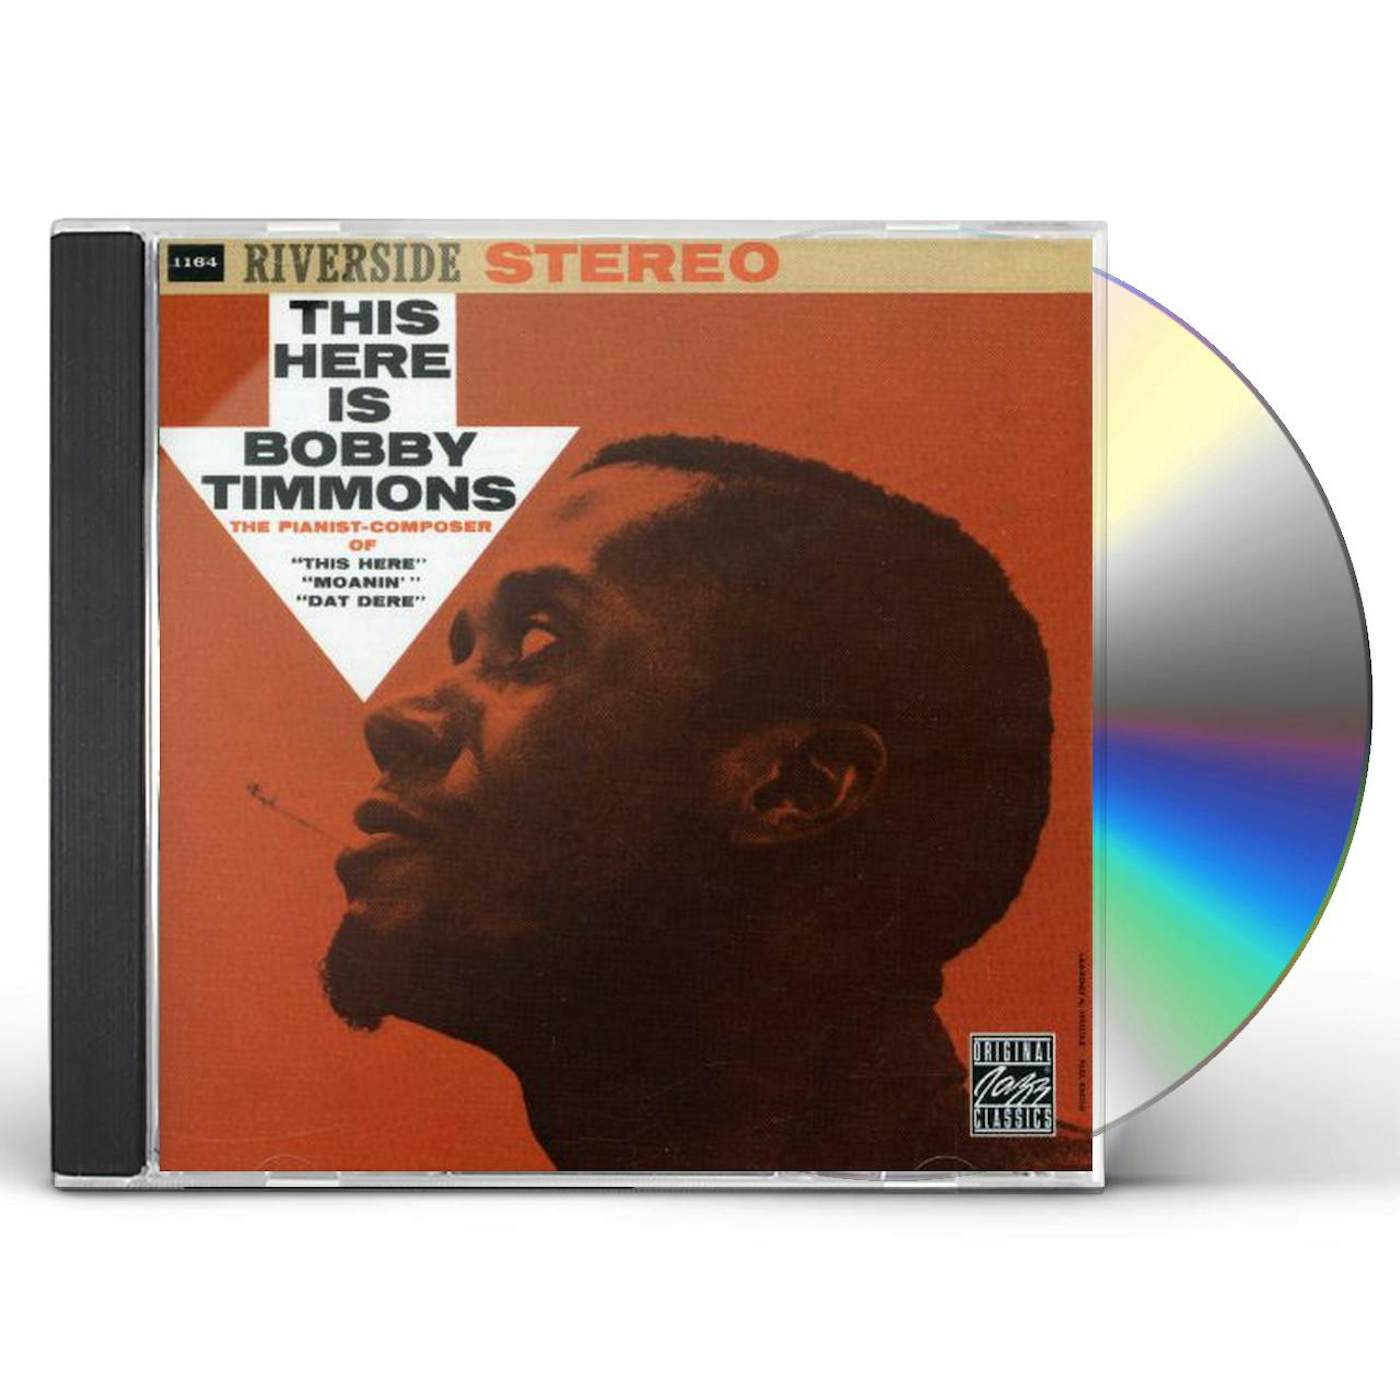 THIS HERE IS BOBBY TIMMONS CD